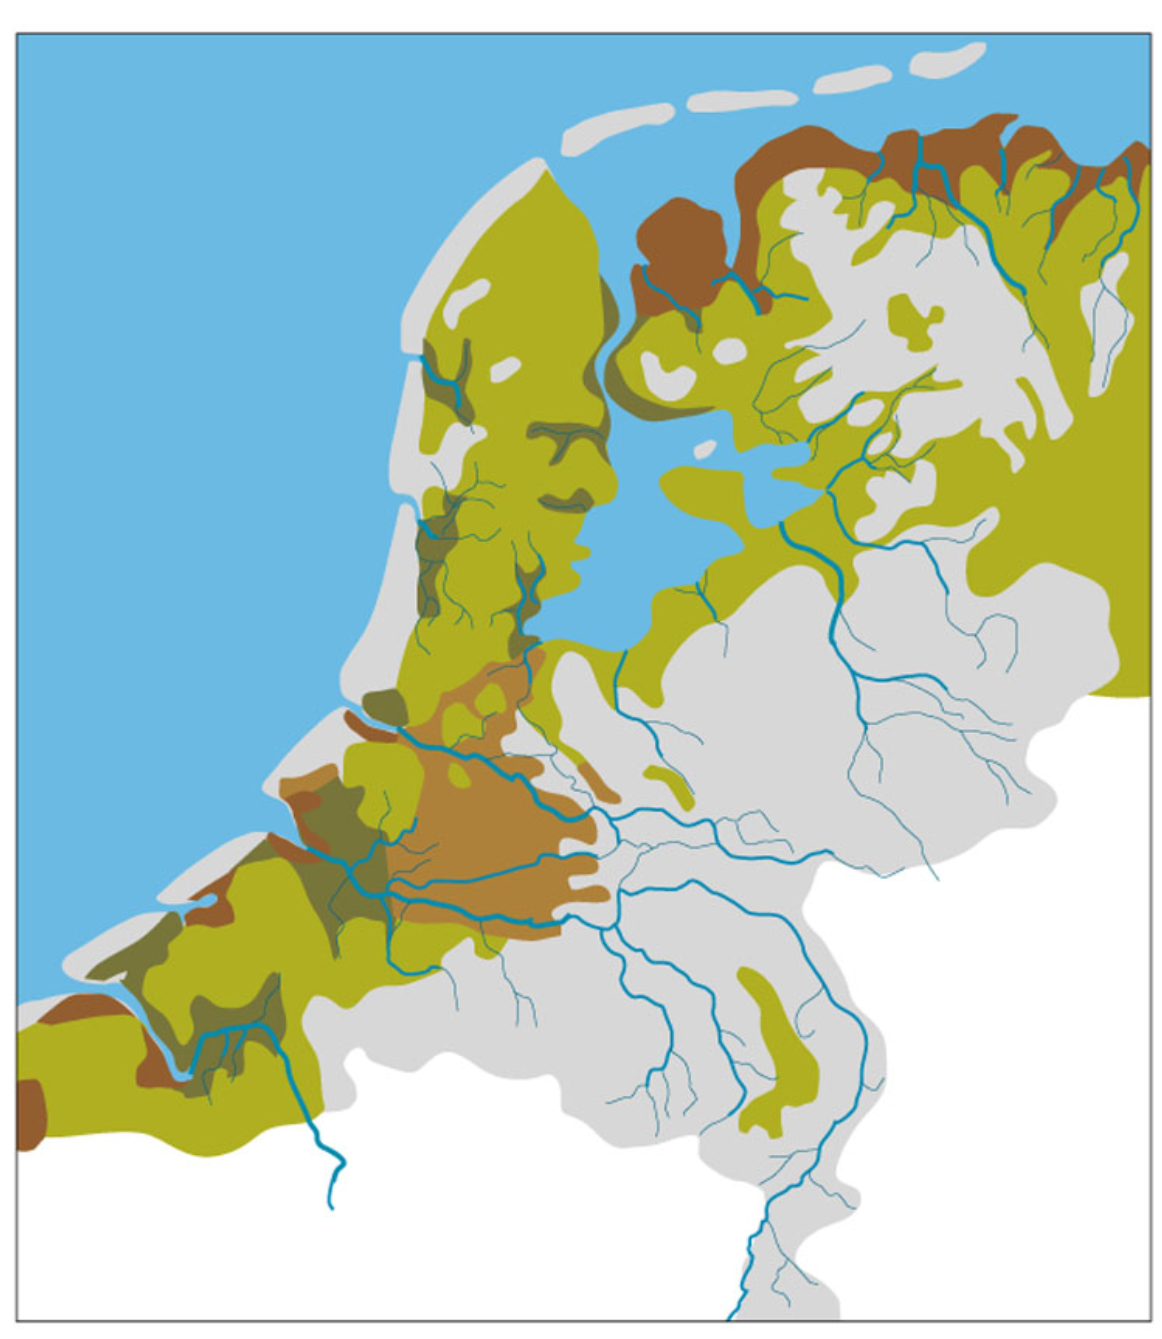 Netherlands about thousand years ago. Coloured is lowland swamp